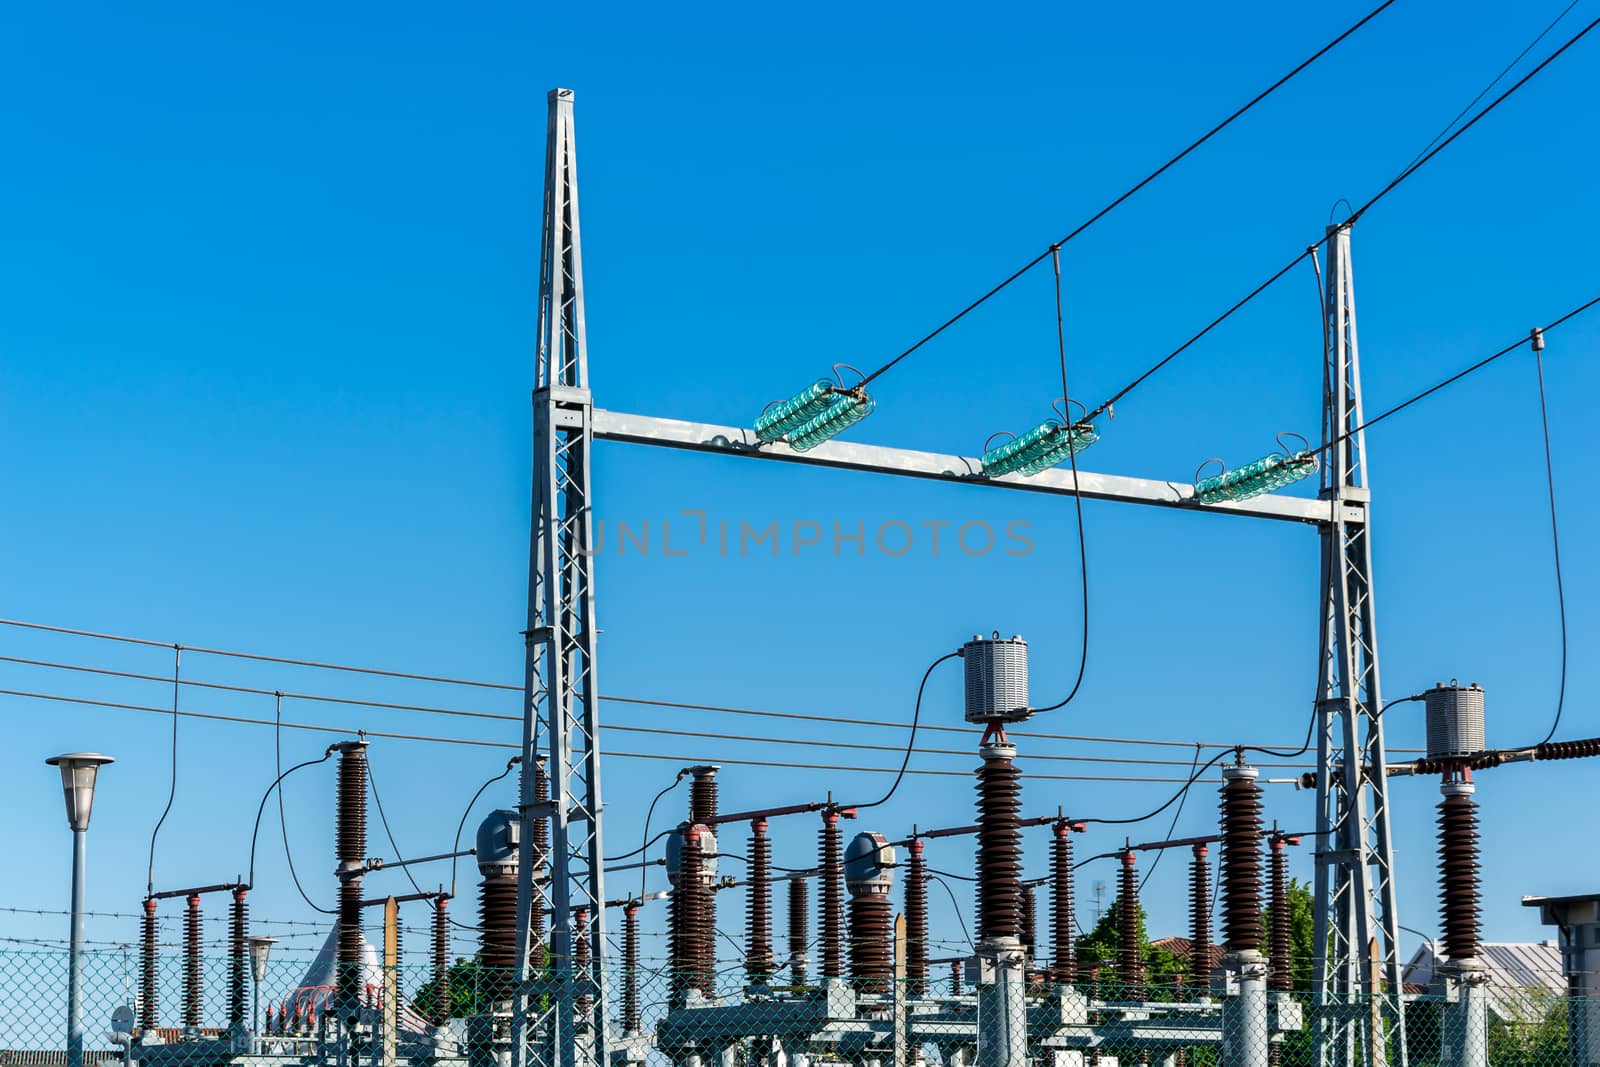 A small high-voltage distribution plant by enrico.lapponi